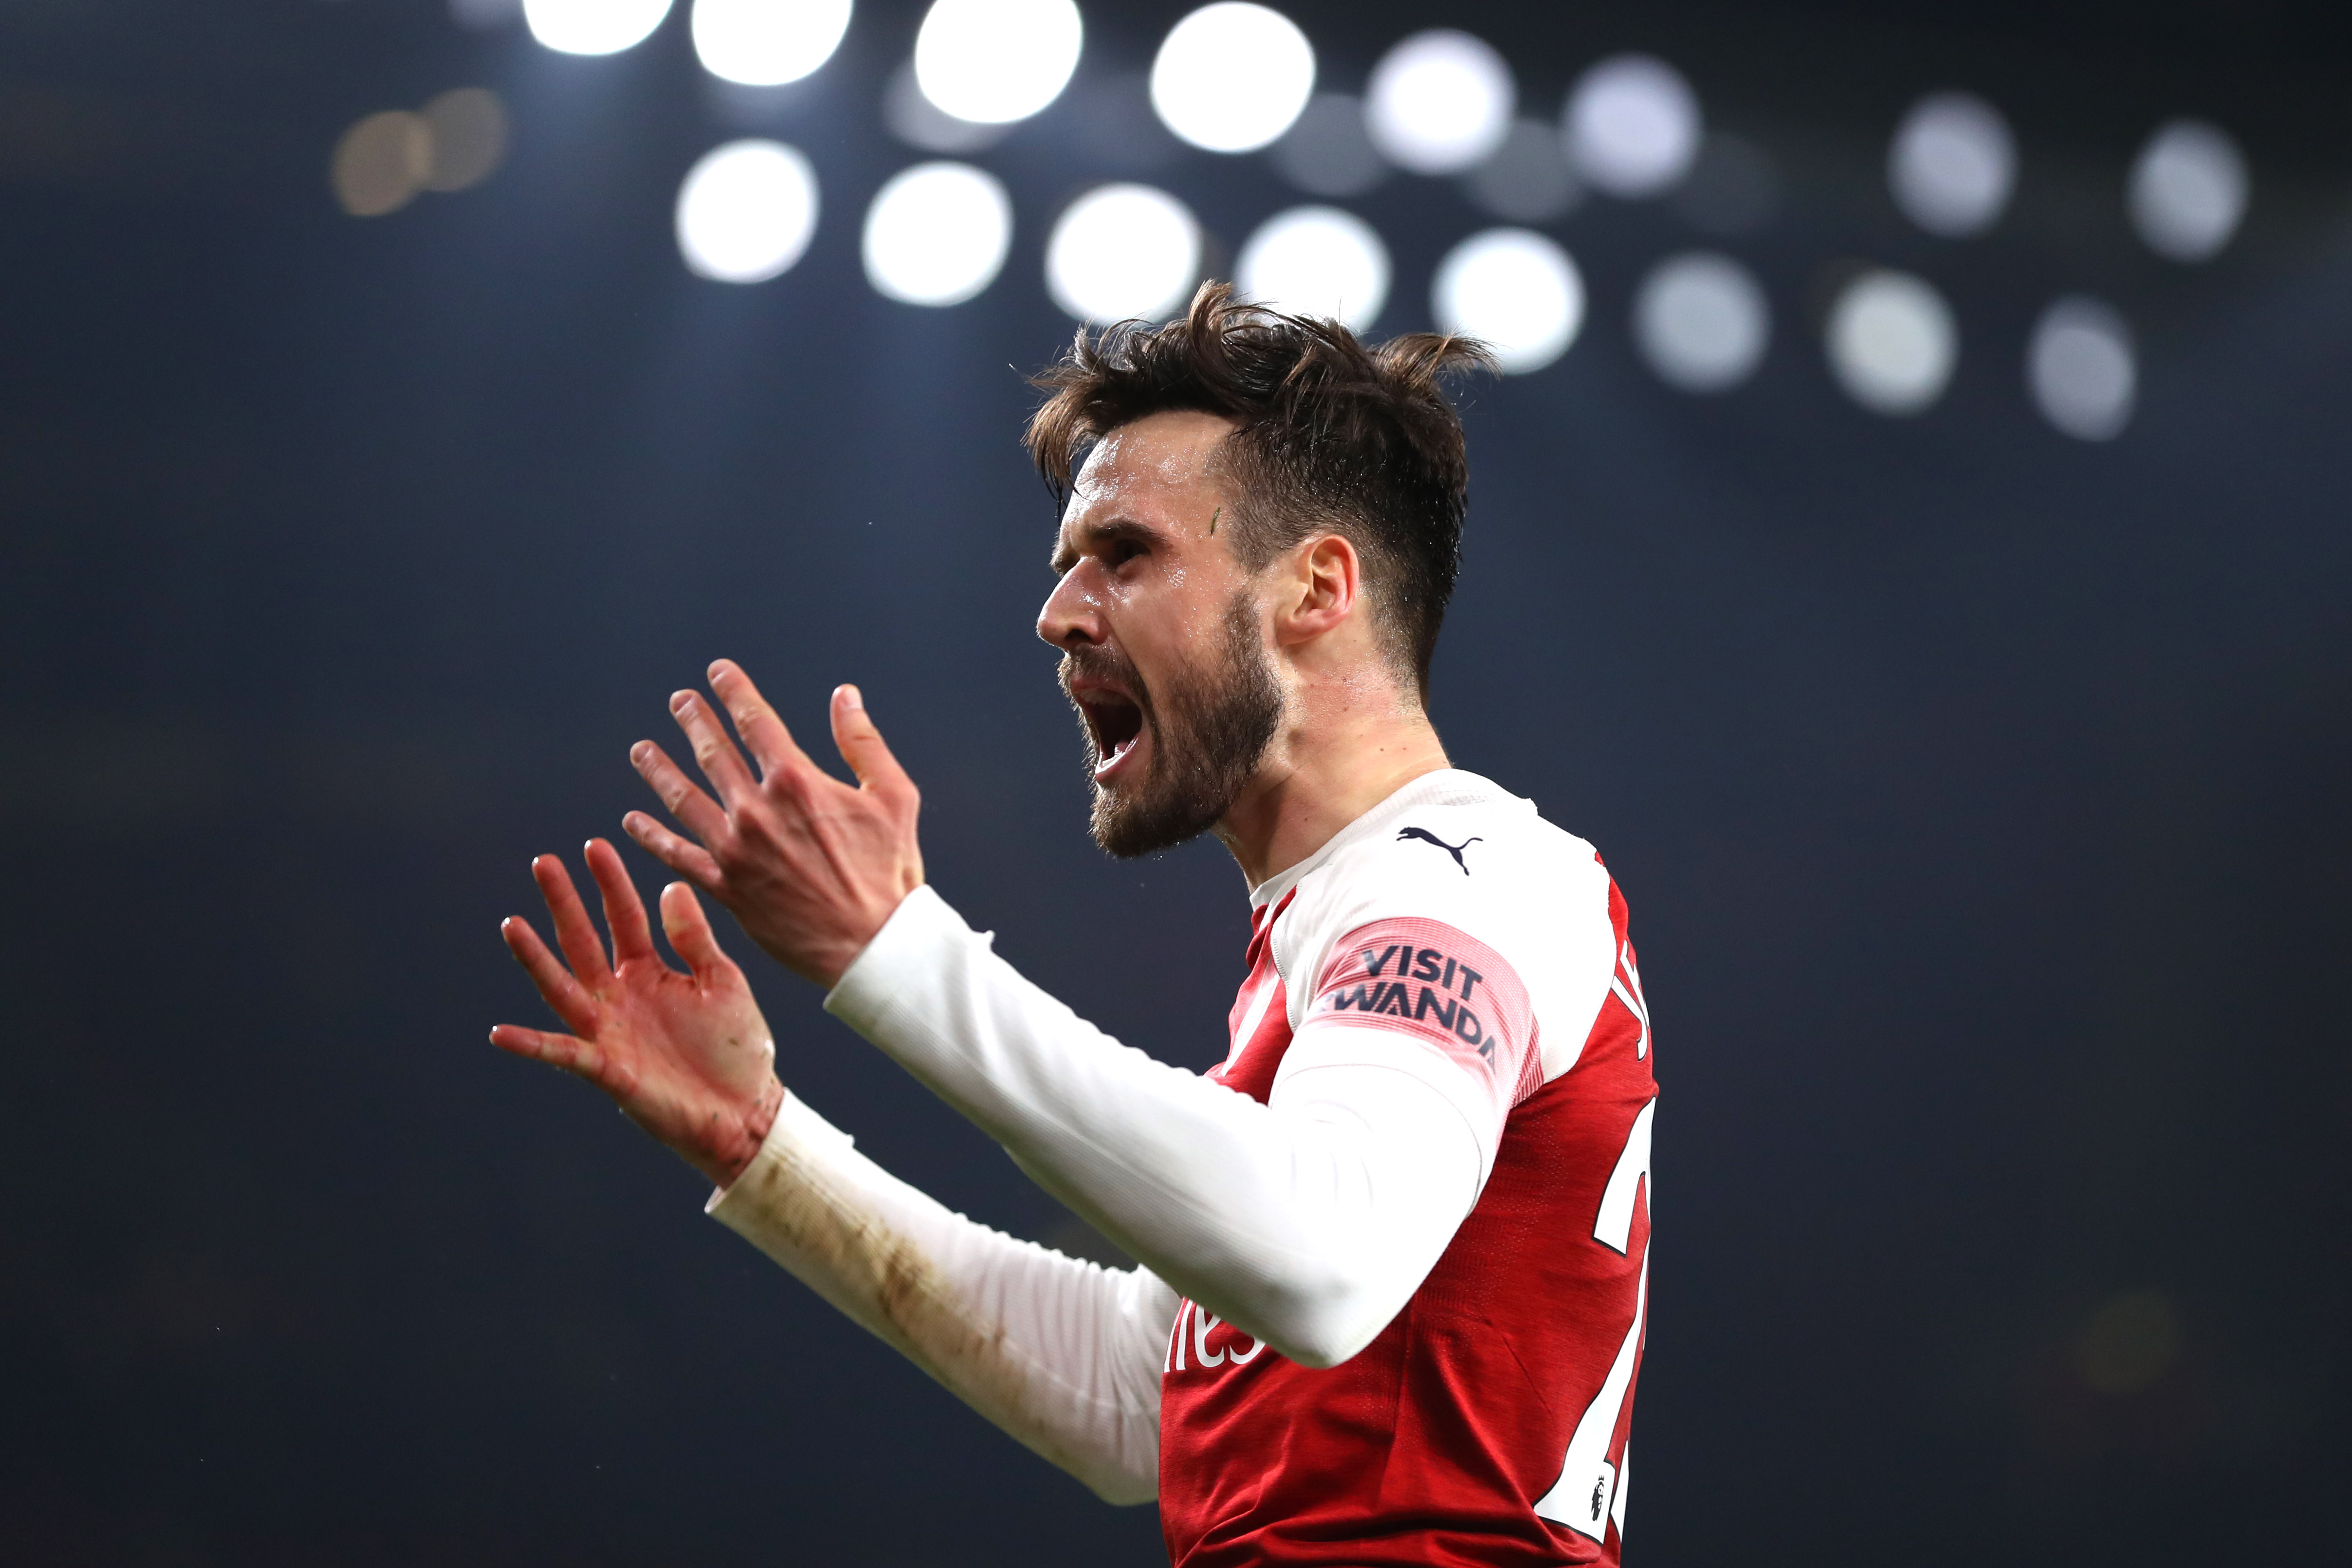 LONDON, ENGLAND - FEBRUARY 27: Carl Jenkinson of Arsenal reacts during the Premier League match between Arsenal FC and AFC Bournemouth at Emirates Stadium on February 27, 2019 in London, United Kingdom. (Photo by Catherine Ivill/Getty Images)